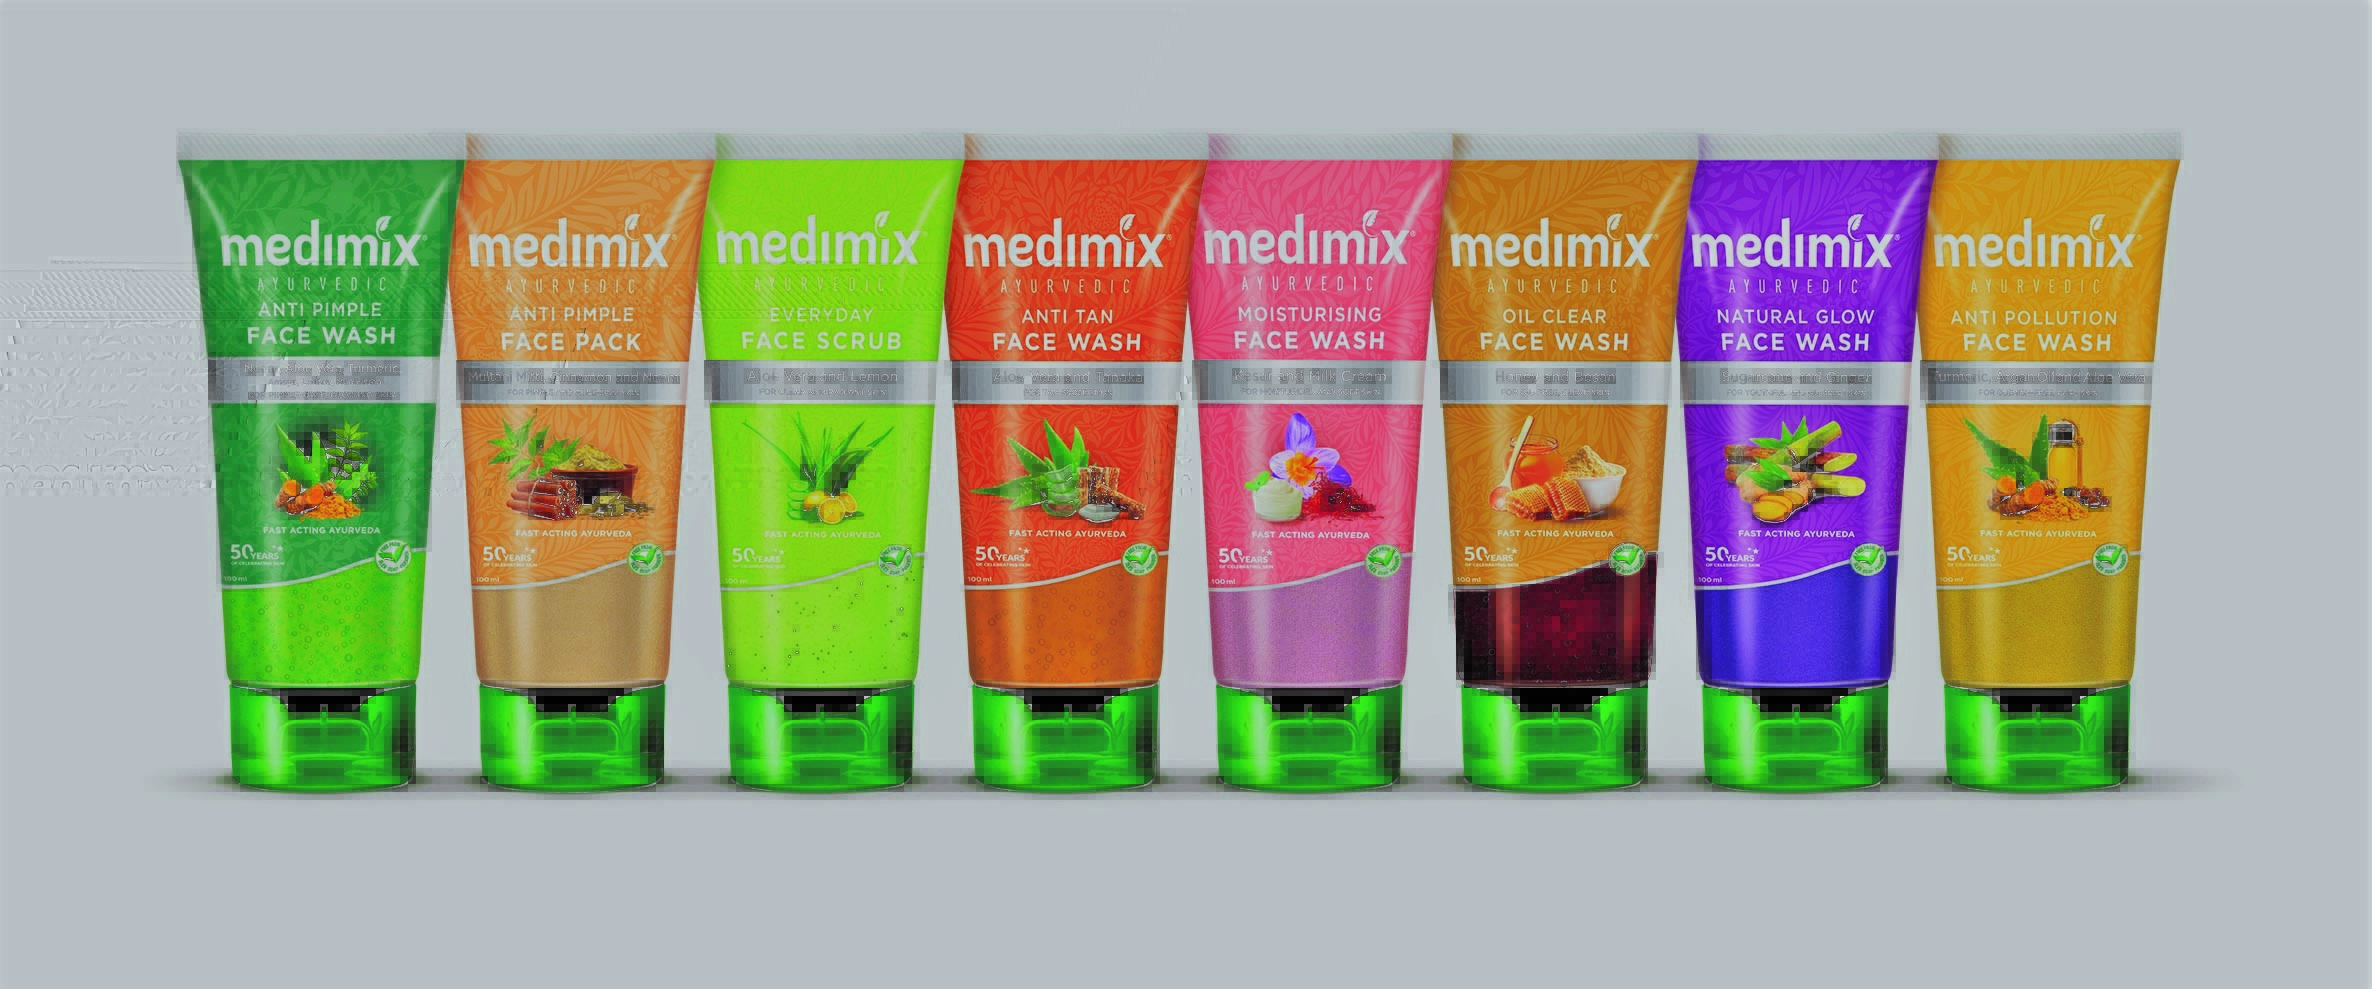 medimix-relaunches-face-care-range-that-has-it-all